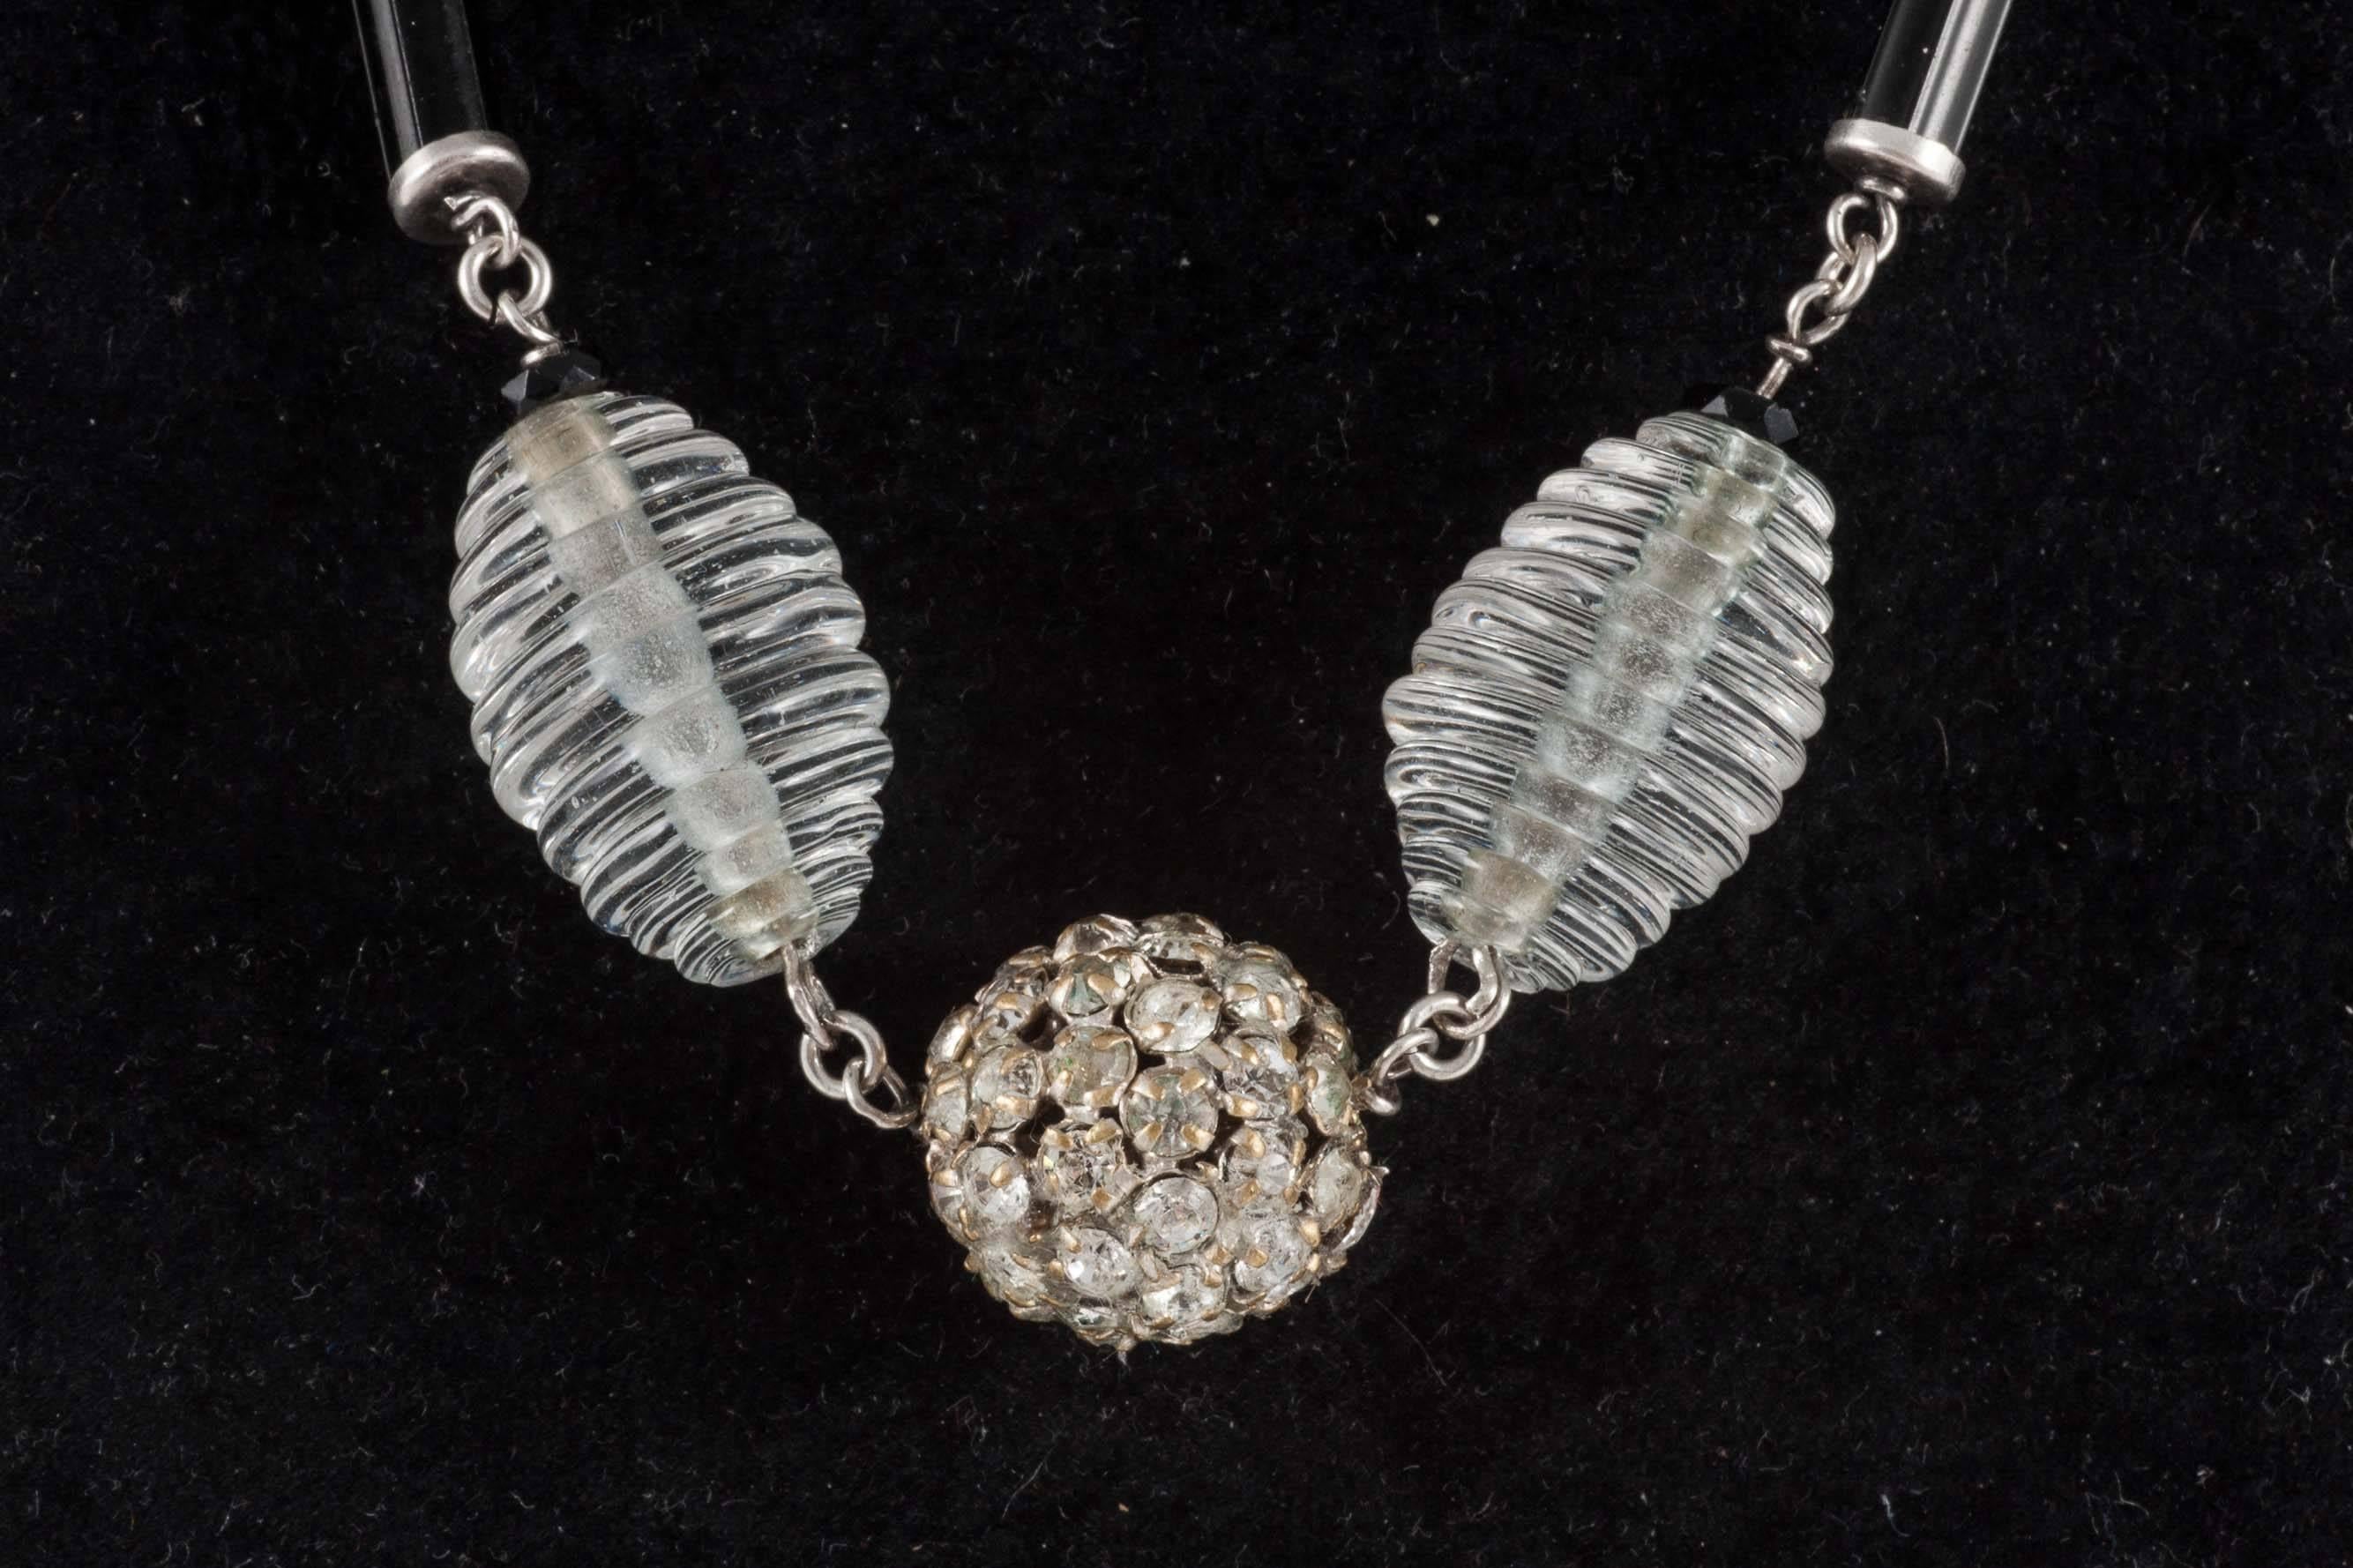 A beautiful survival from the 1920s, this lovely piece has crackle and spun glass clear beads, interspersed with rhinestone encrusted balls and beautiful black enamel cylinders. High on glamour but low on weight, this could become a favourite for